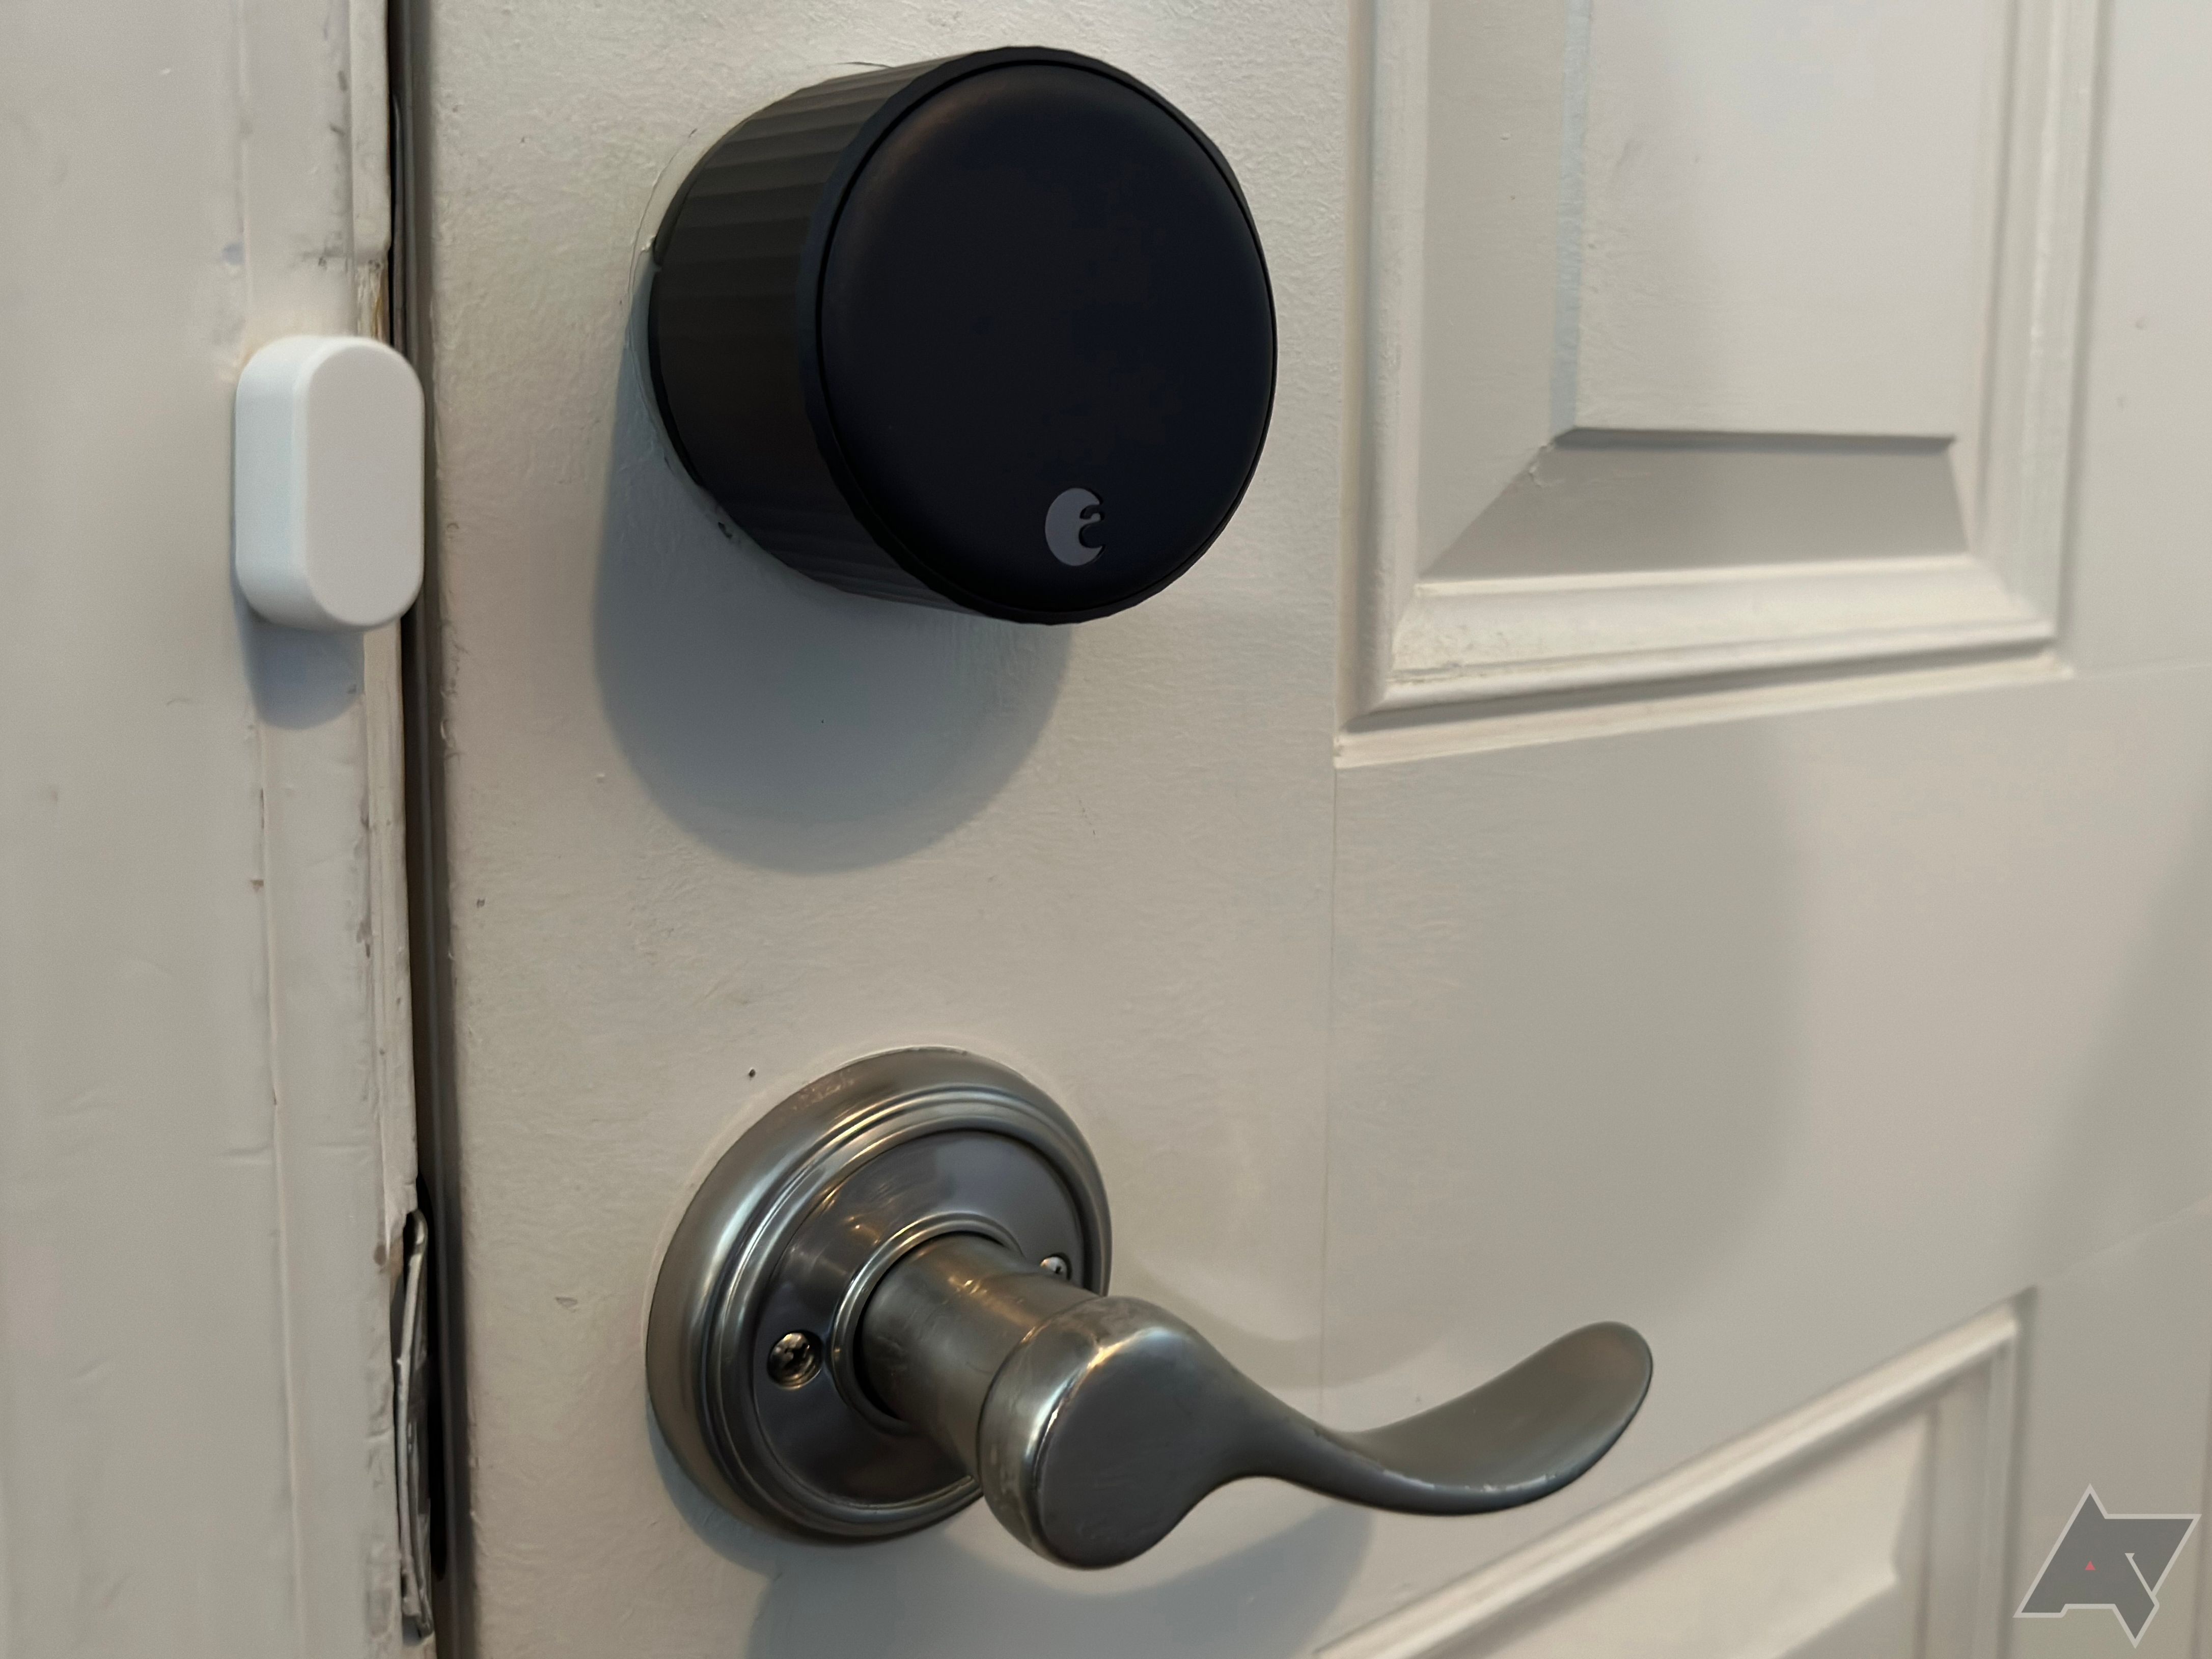 August's wif-fi smart lock attached to a door